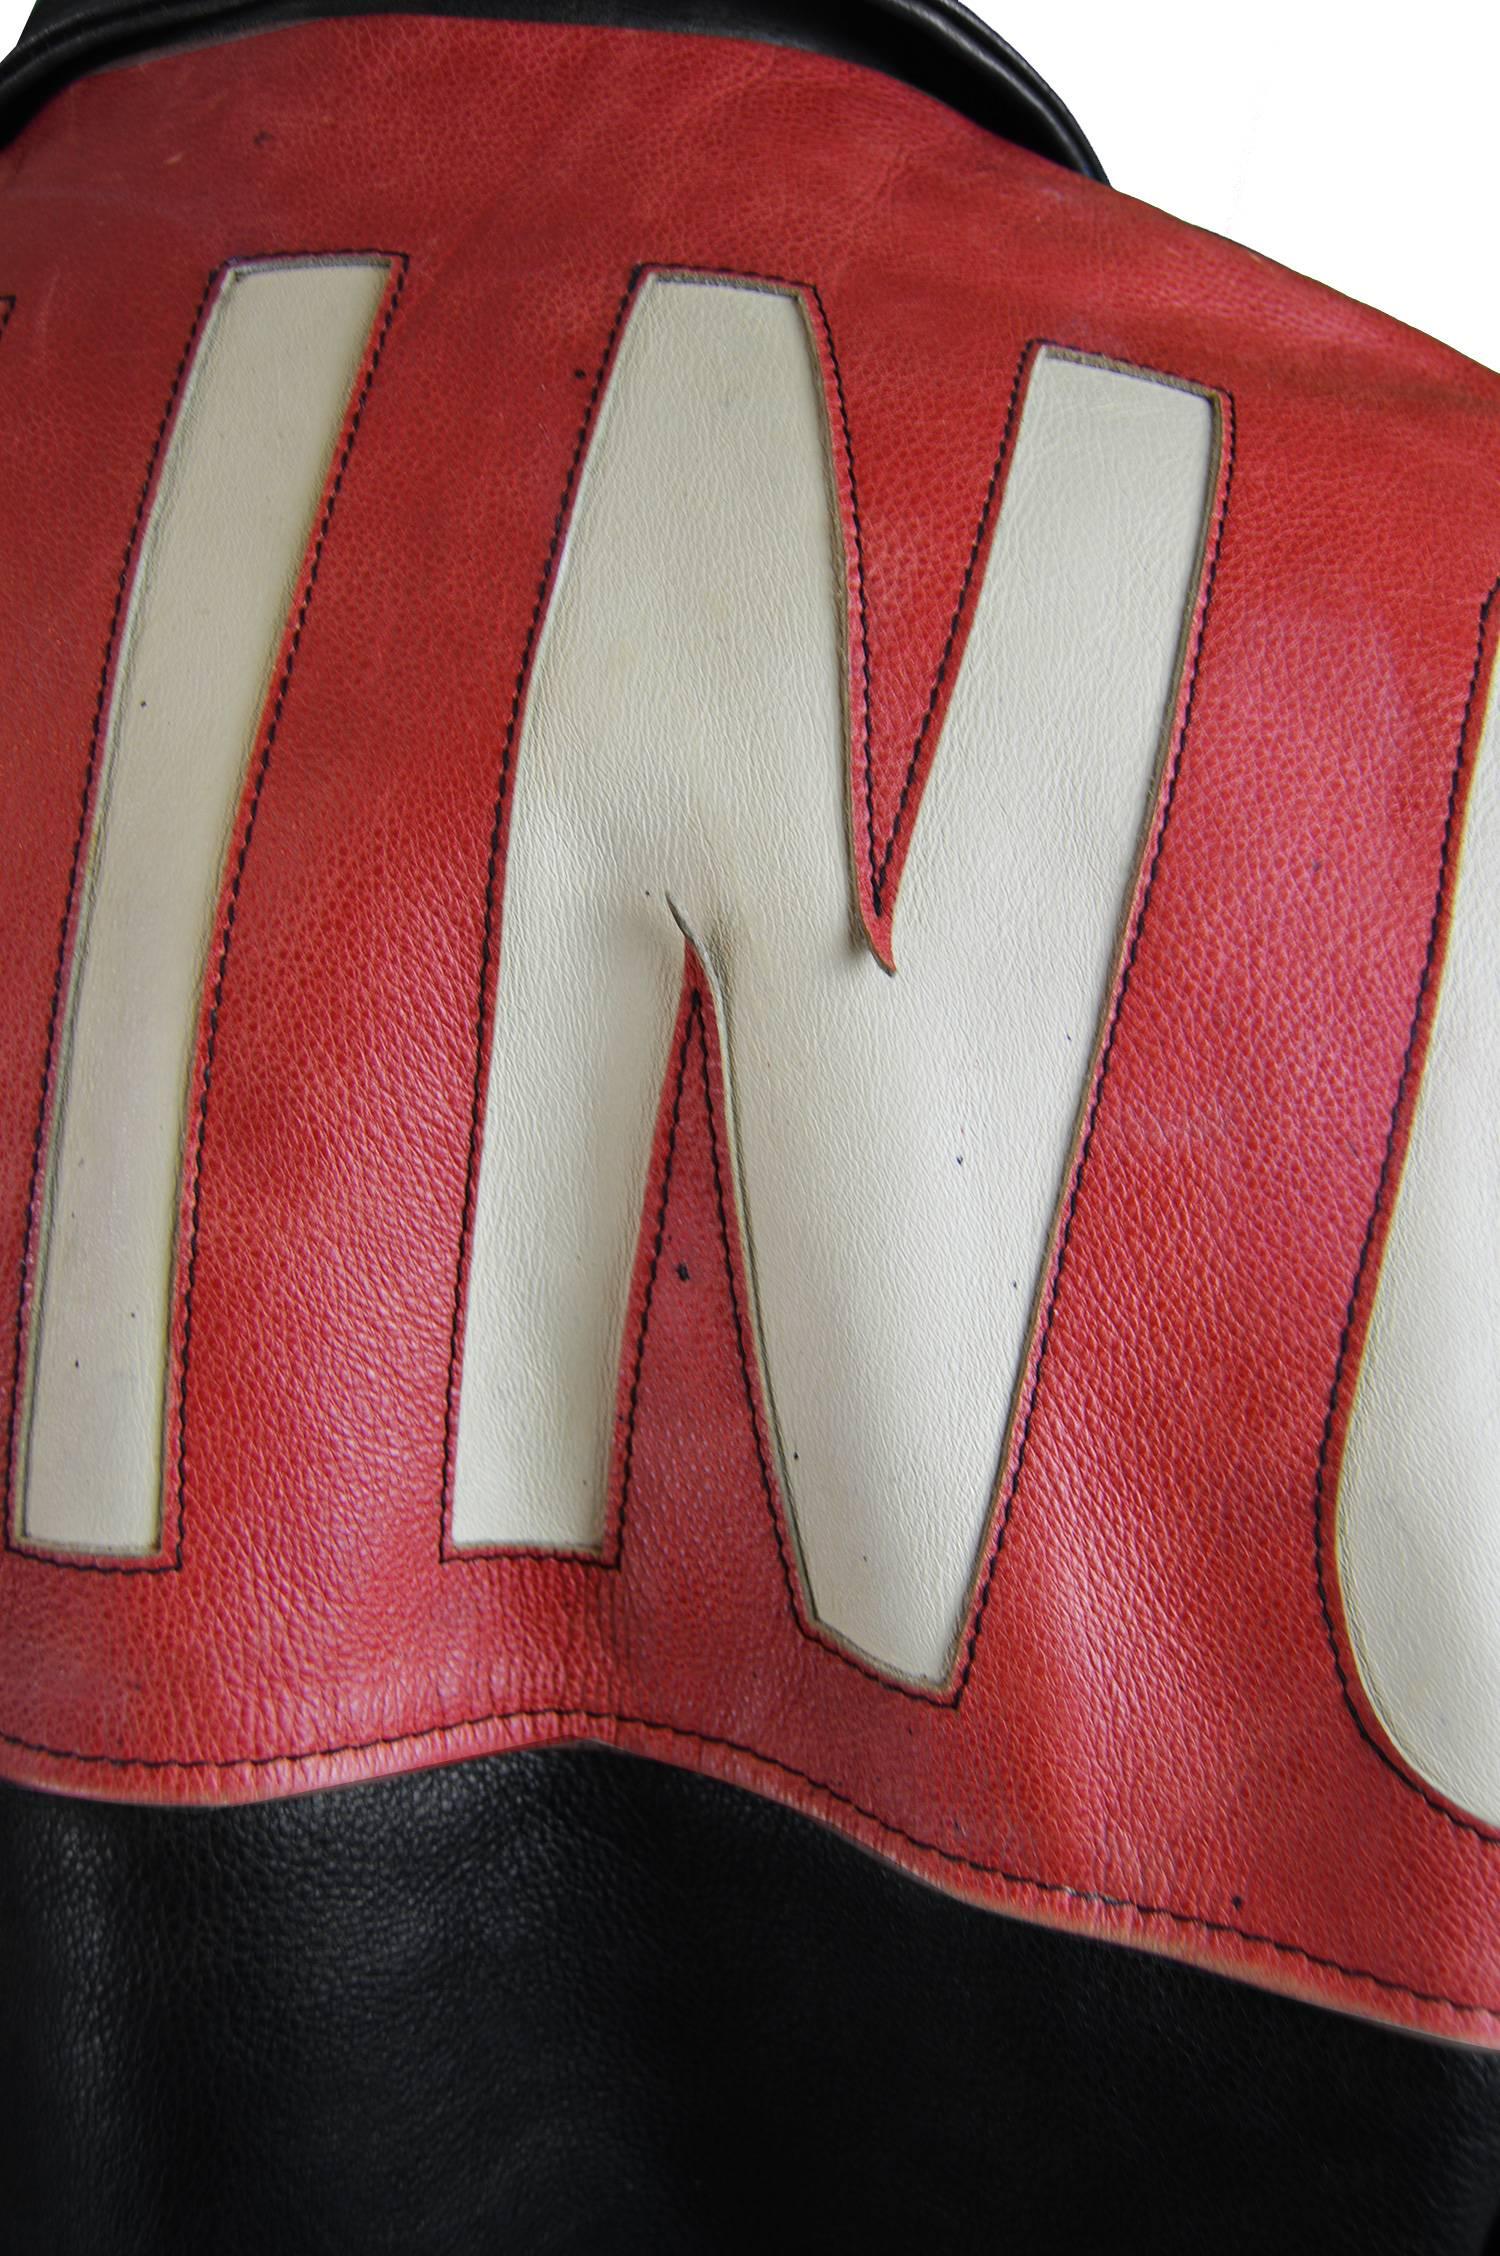 Moschino Men's Vintage Black and Red Love Heart Leather Jacket, 1990s 2